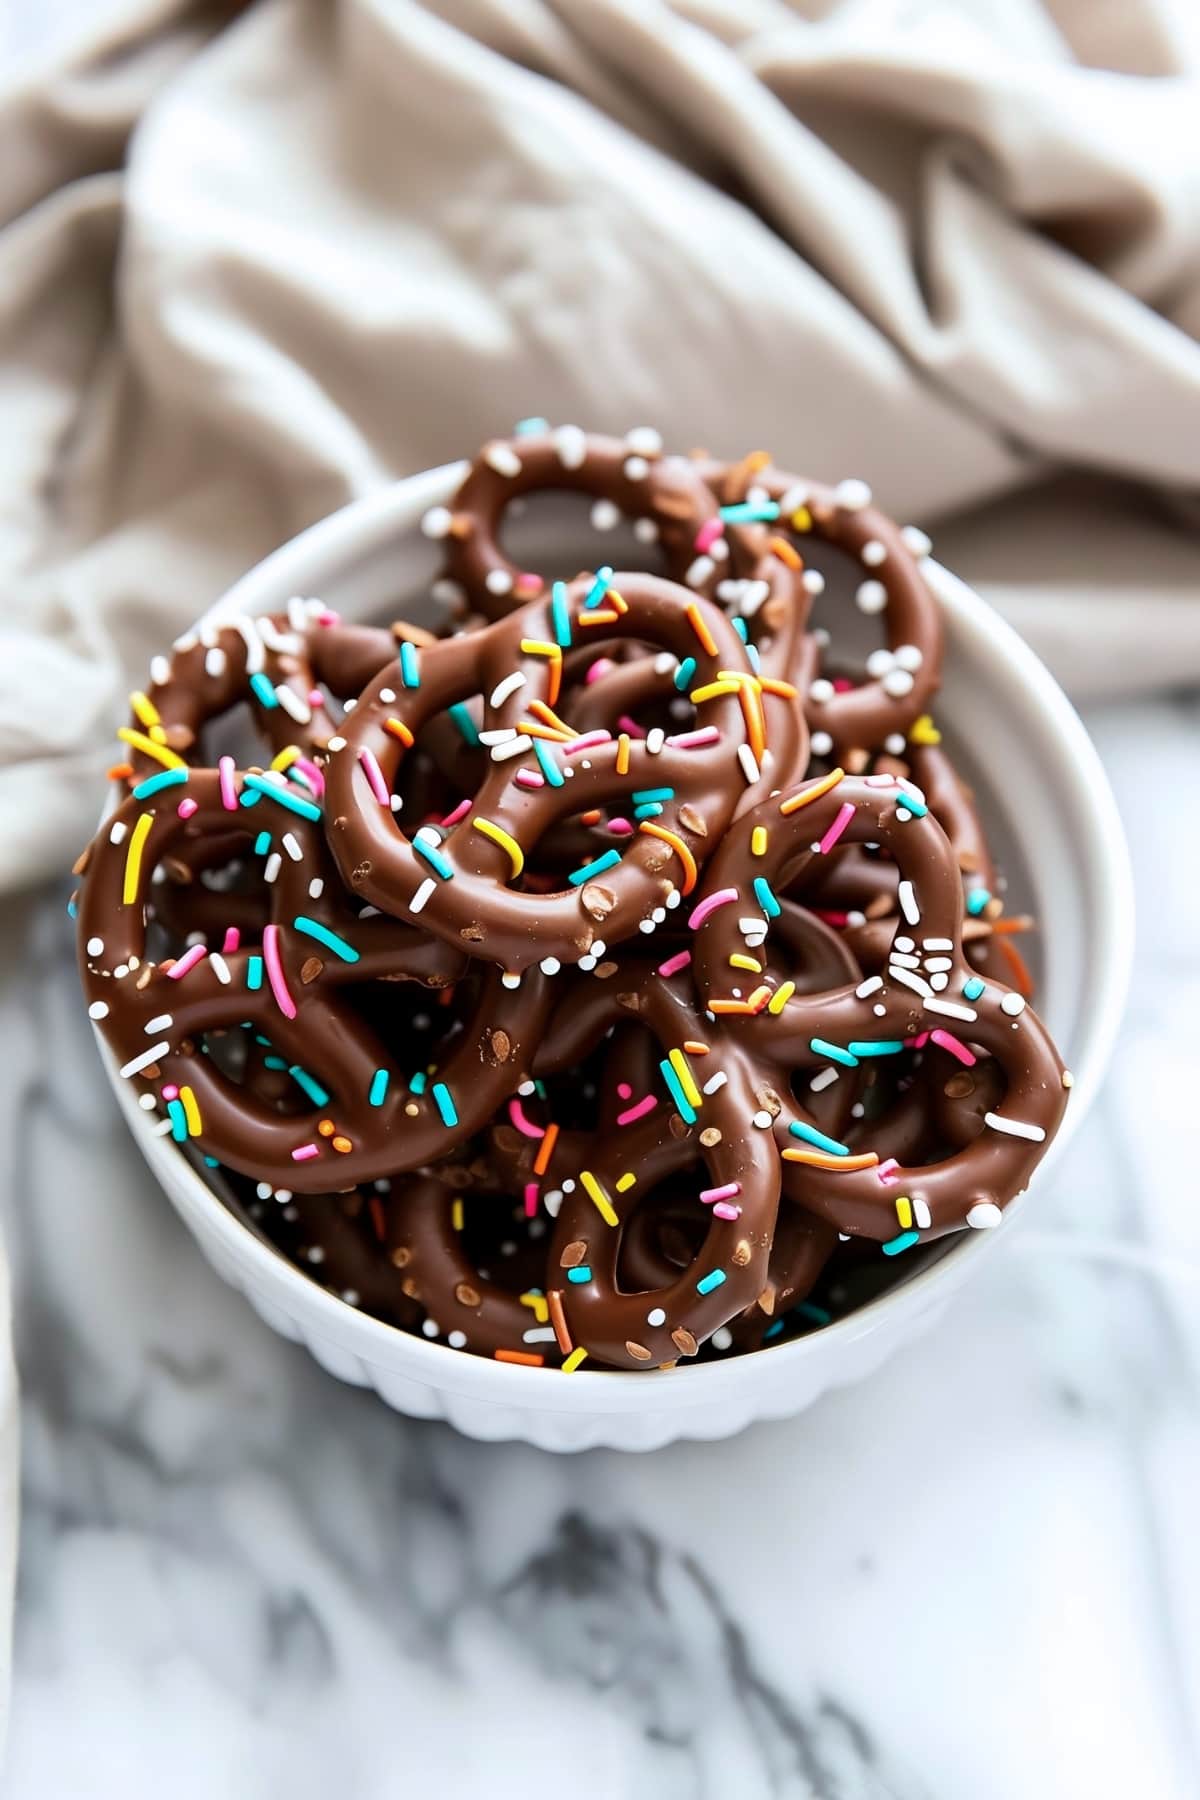 Sweet homemade chocolate covered pretzels with sprinkles in a white bowl